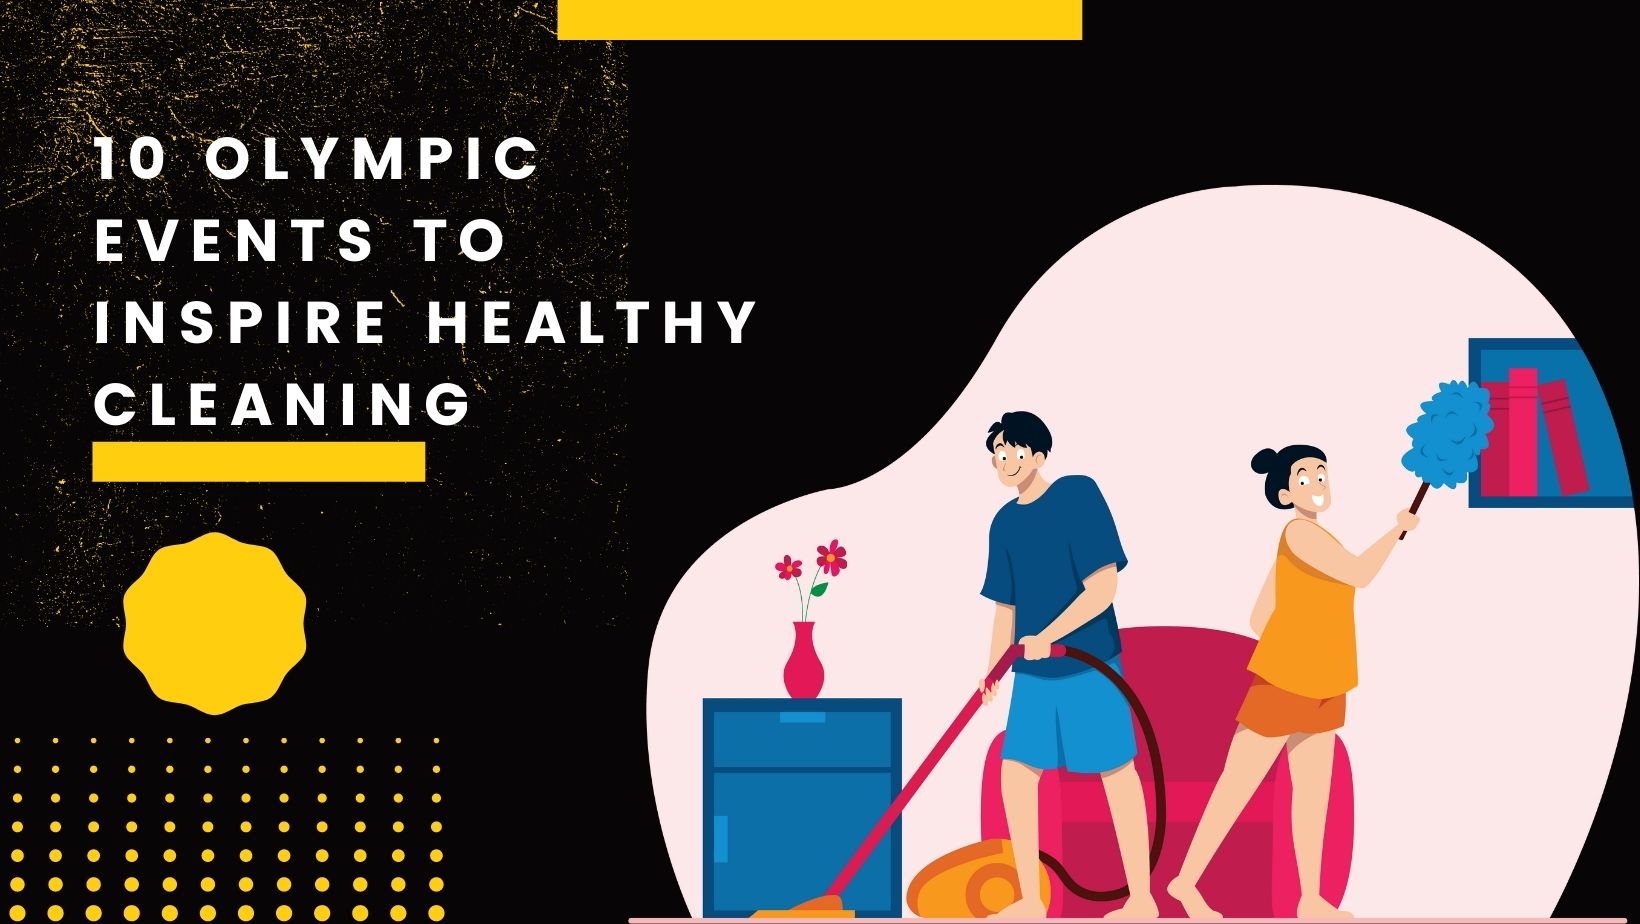 10 Olympic Events to Inspire Healthy Cleaning